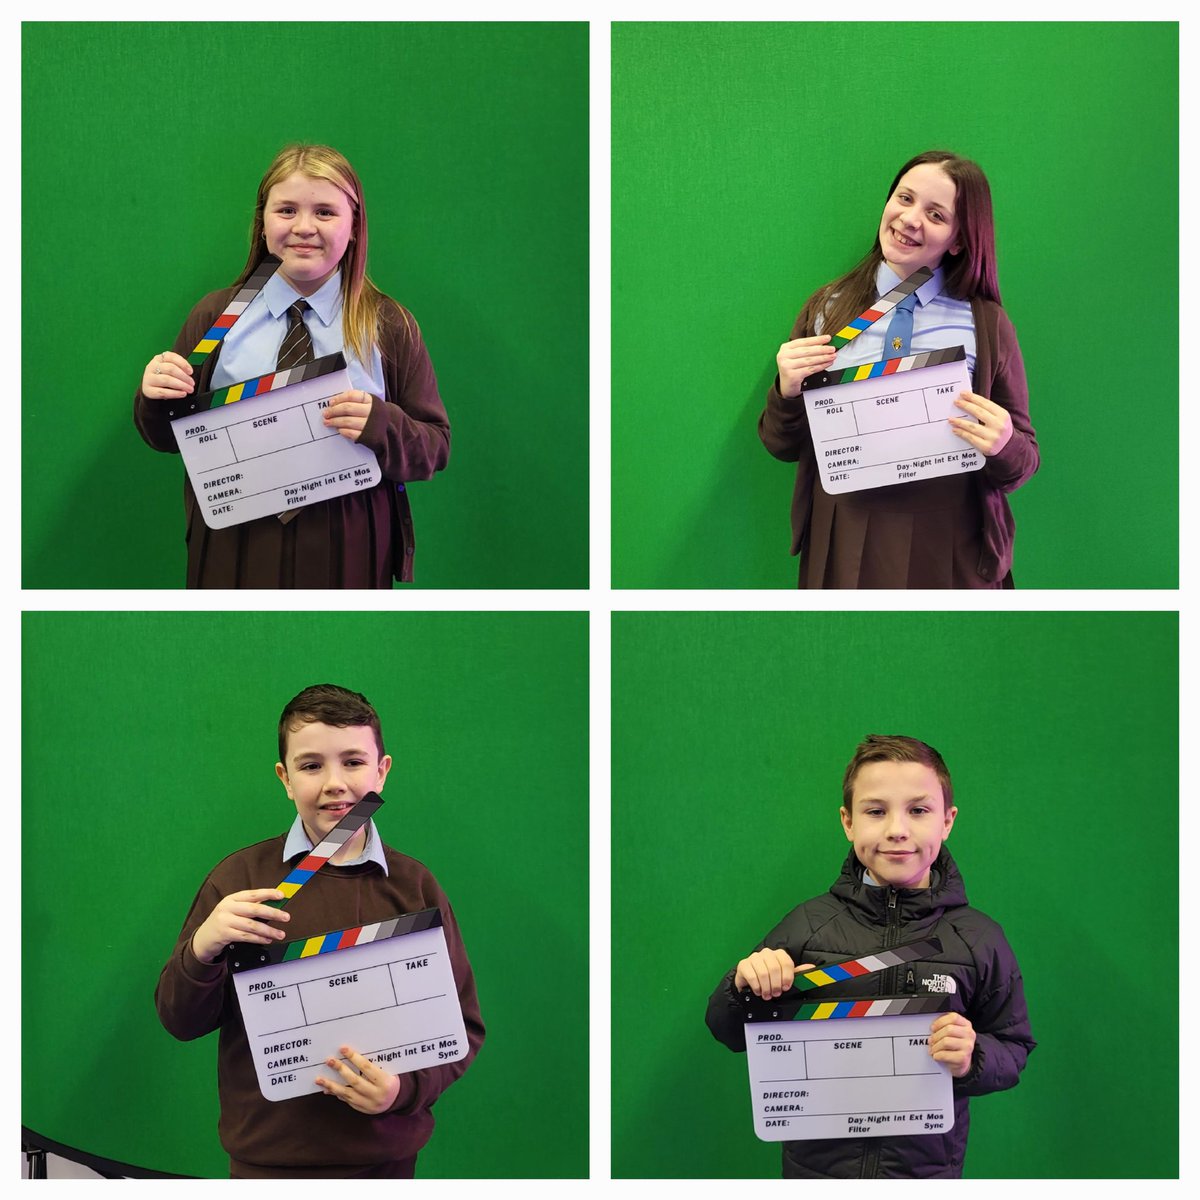 Lights!🎙Camera!🎥 Action!🎬 A massive thankyou to @Peterpattison6 for helping our JRSO record and edit their Road Safety Advert.@StBlanesGCC @gw14gillfillan1 What a great experience our children had! #GCCRoadSafety #JRSO #sustainabletravel